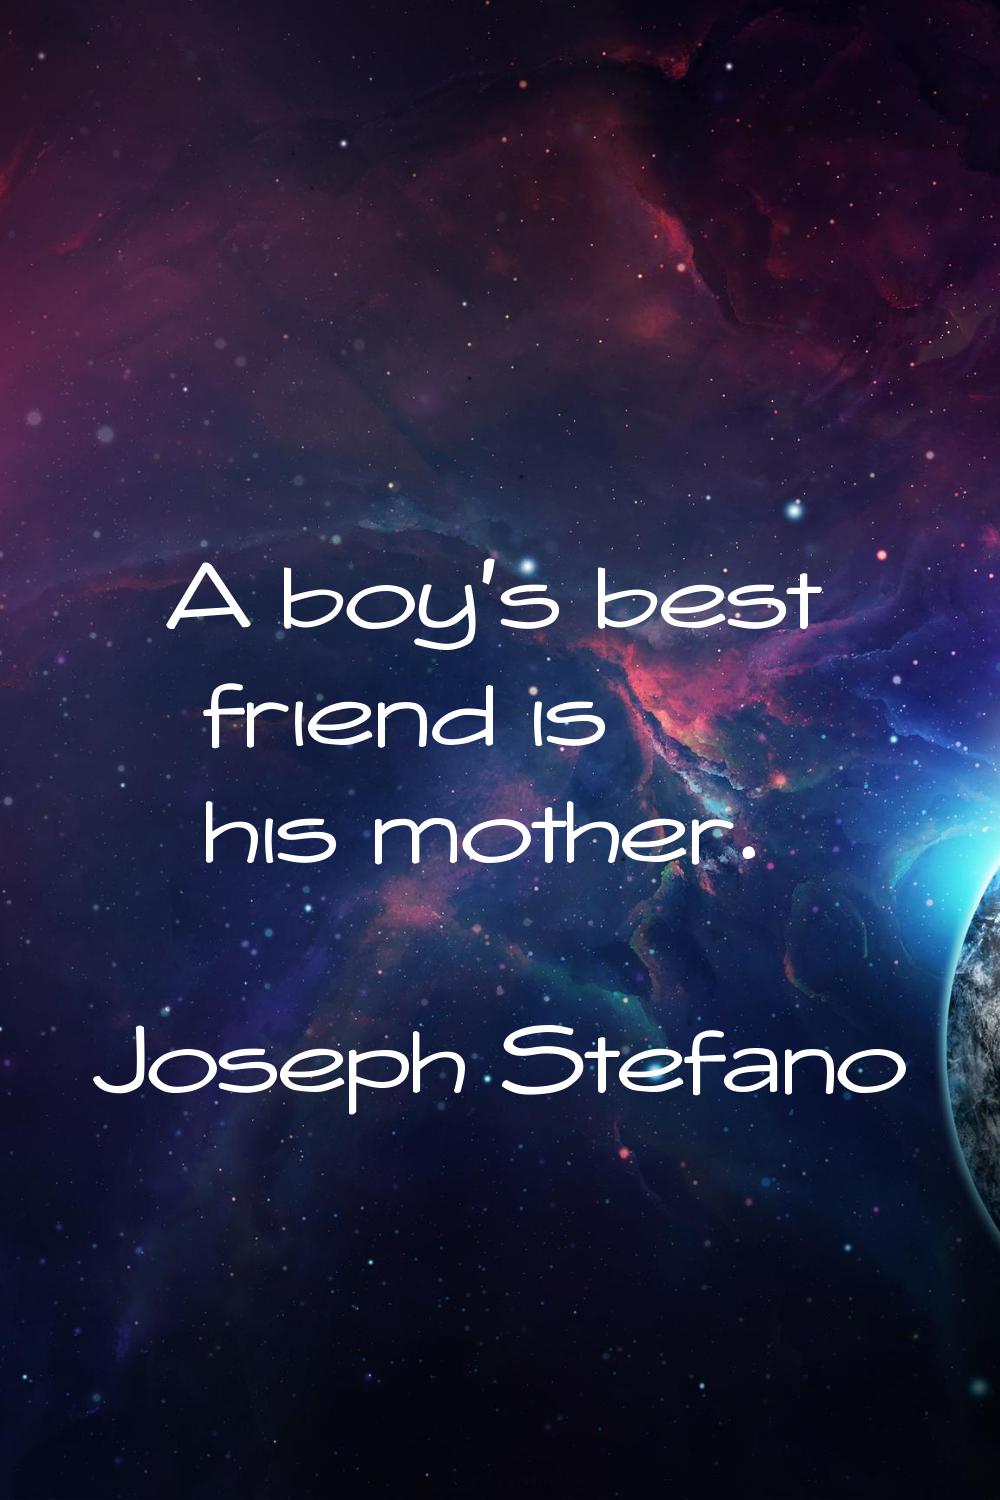 A boy's best friend is his mother.